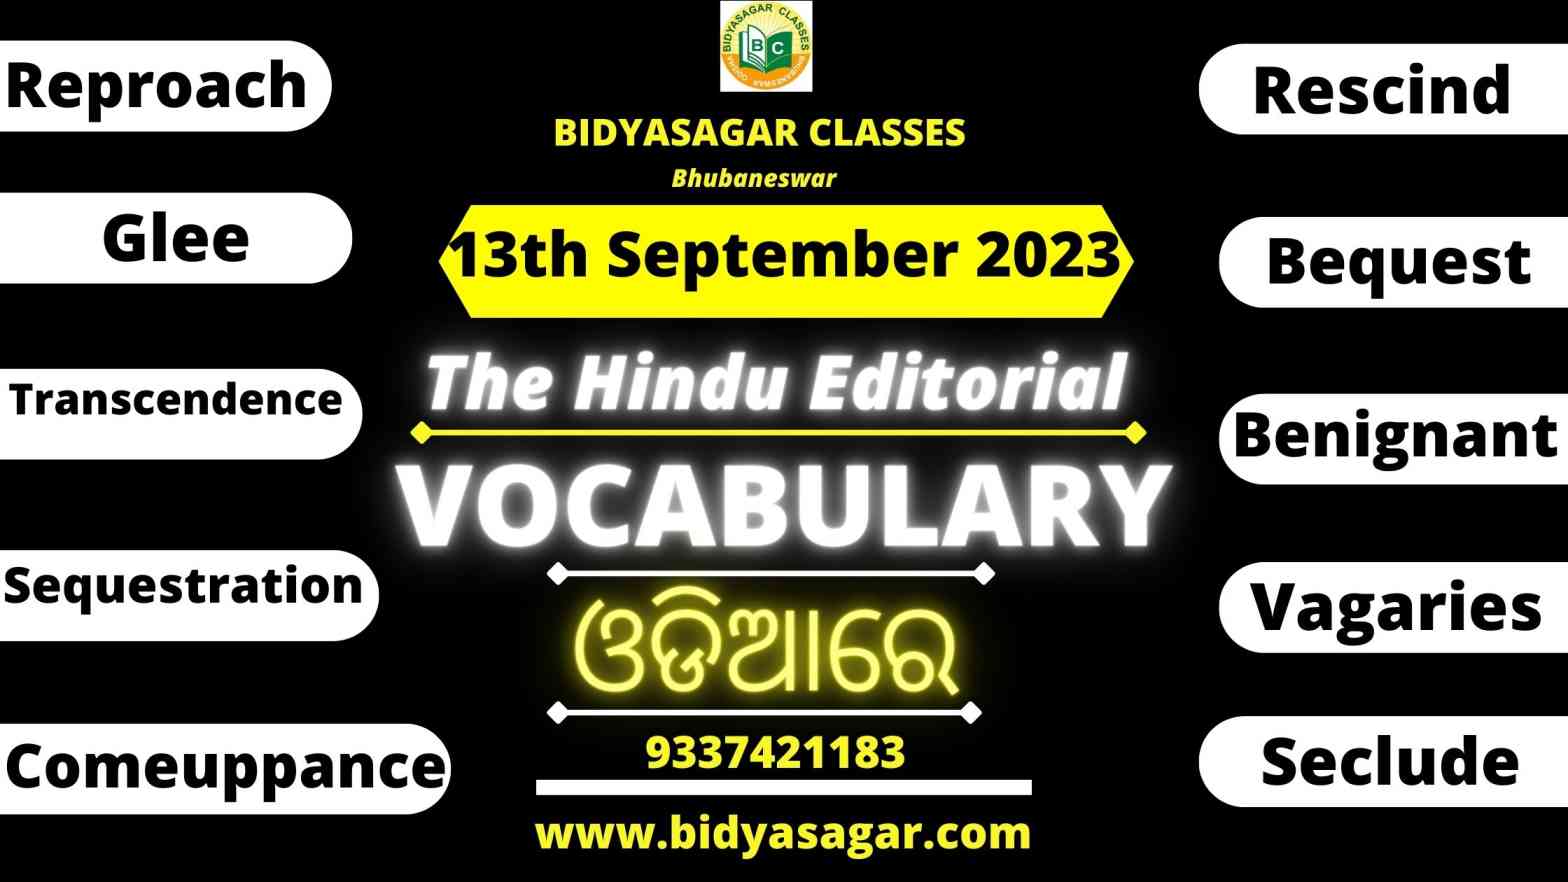 The Hindu Editorial Vocabulary of 13th September 2023